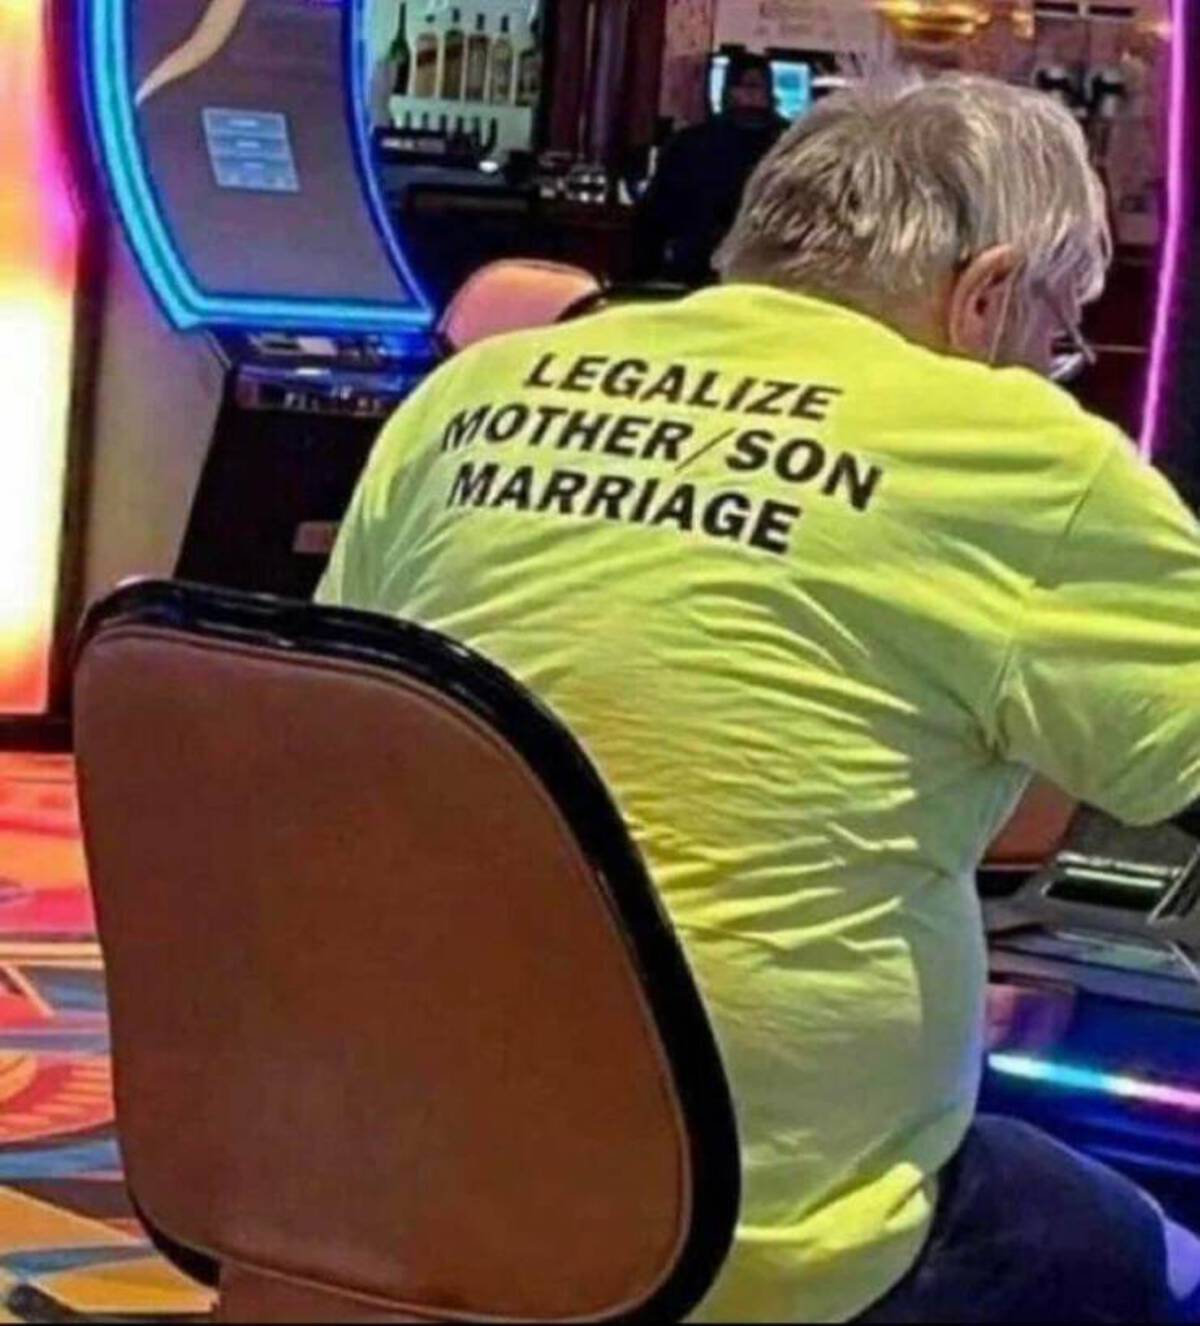 sitting - Ahj Legalize MotherSon Marriage